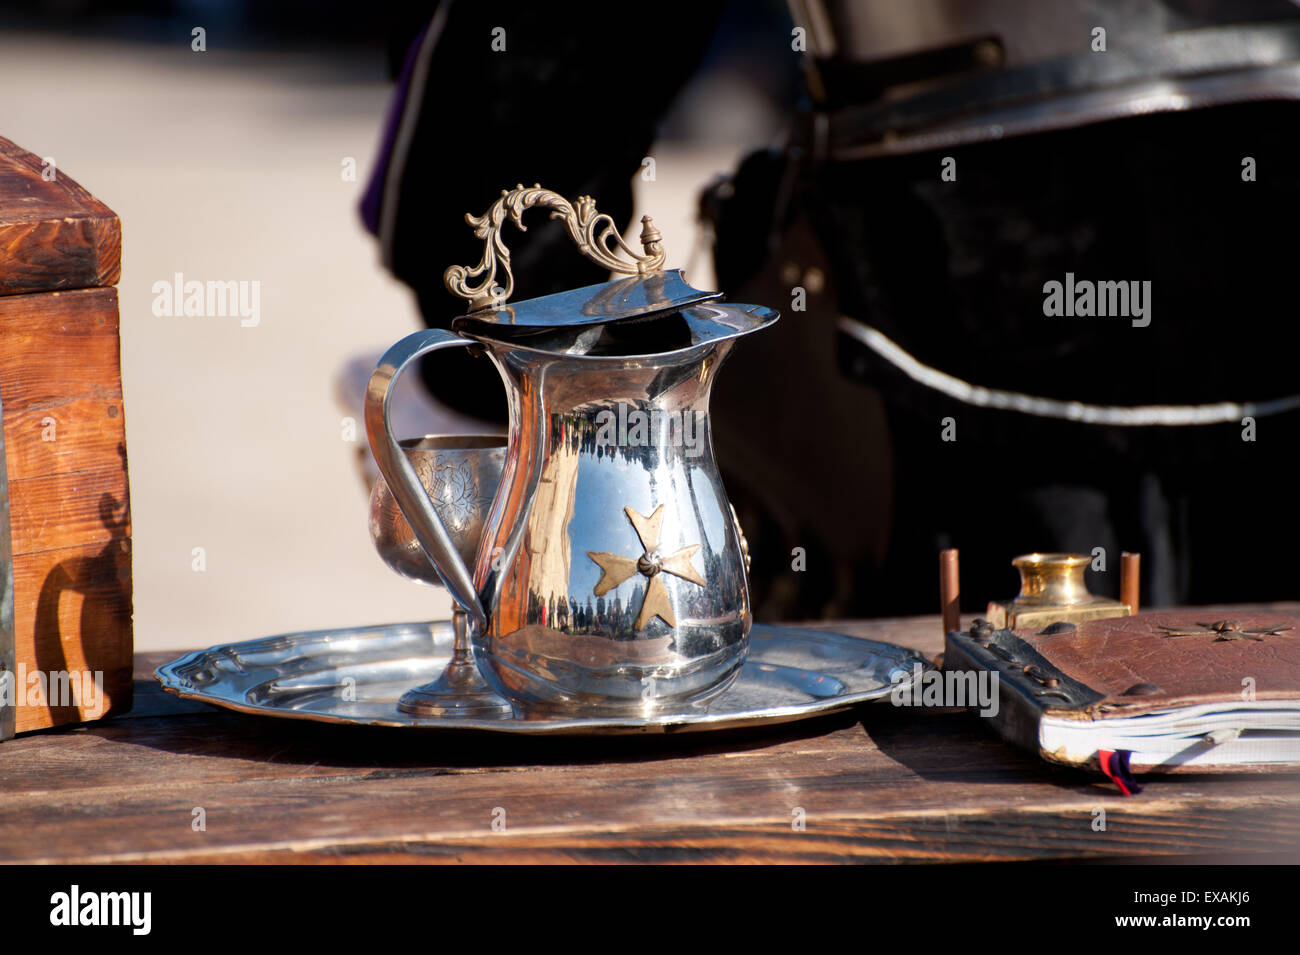 A Metal pitcher with Maltese cross stay on the table Stock Photo